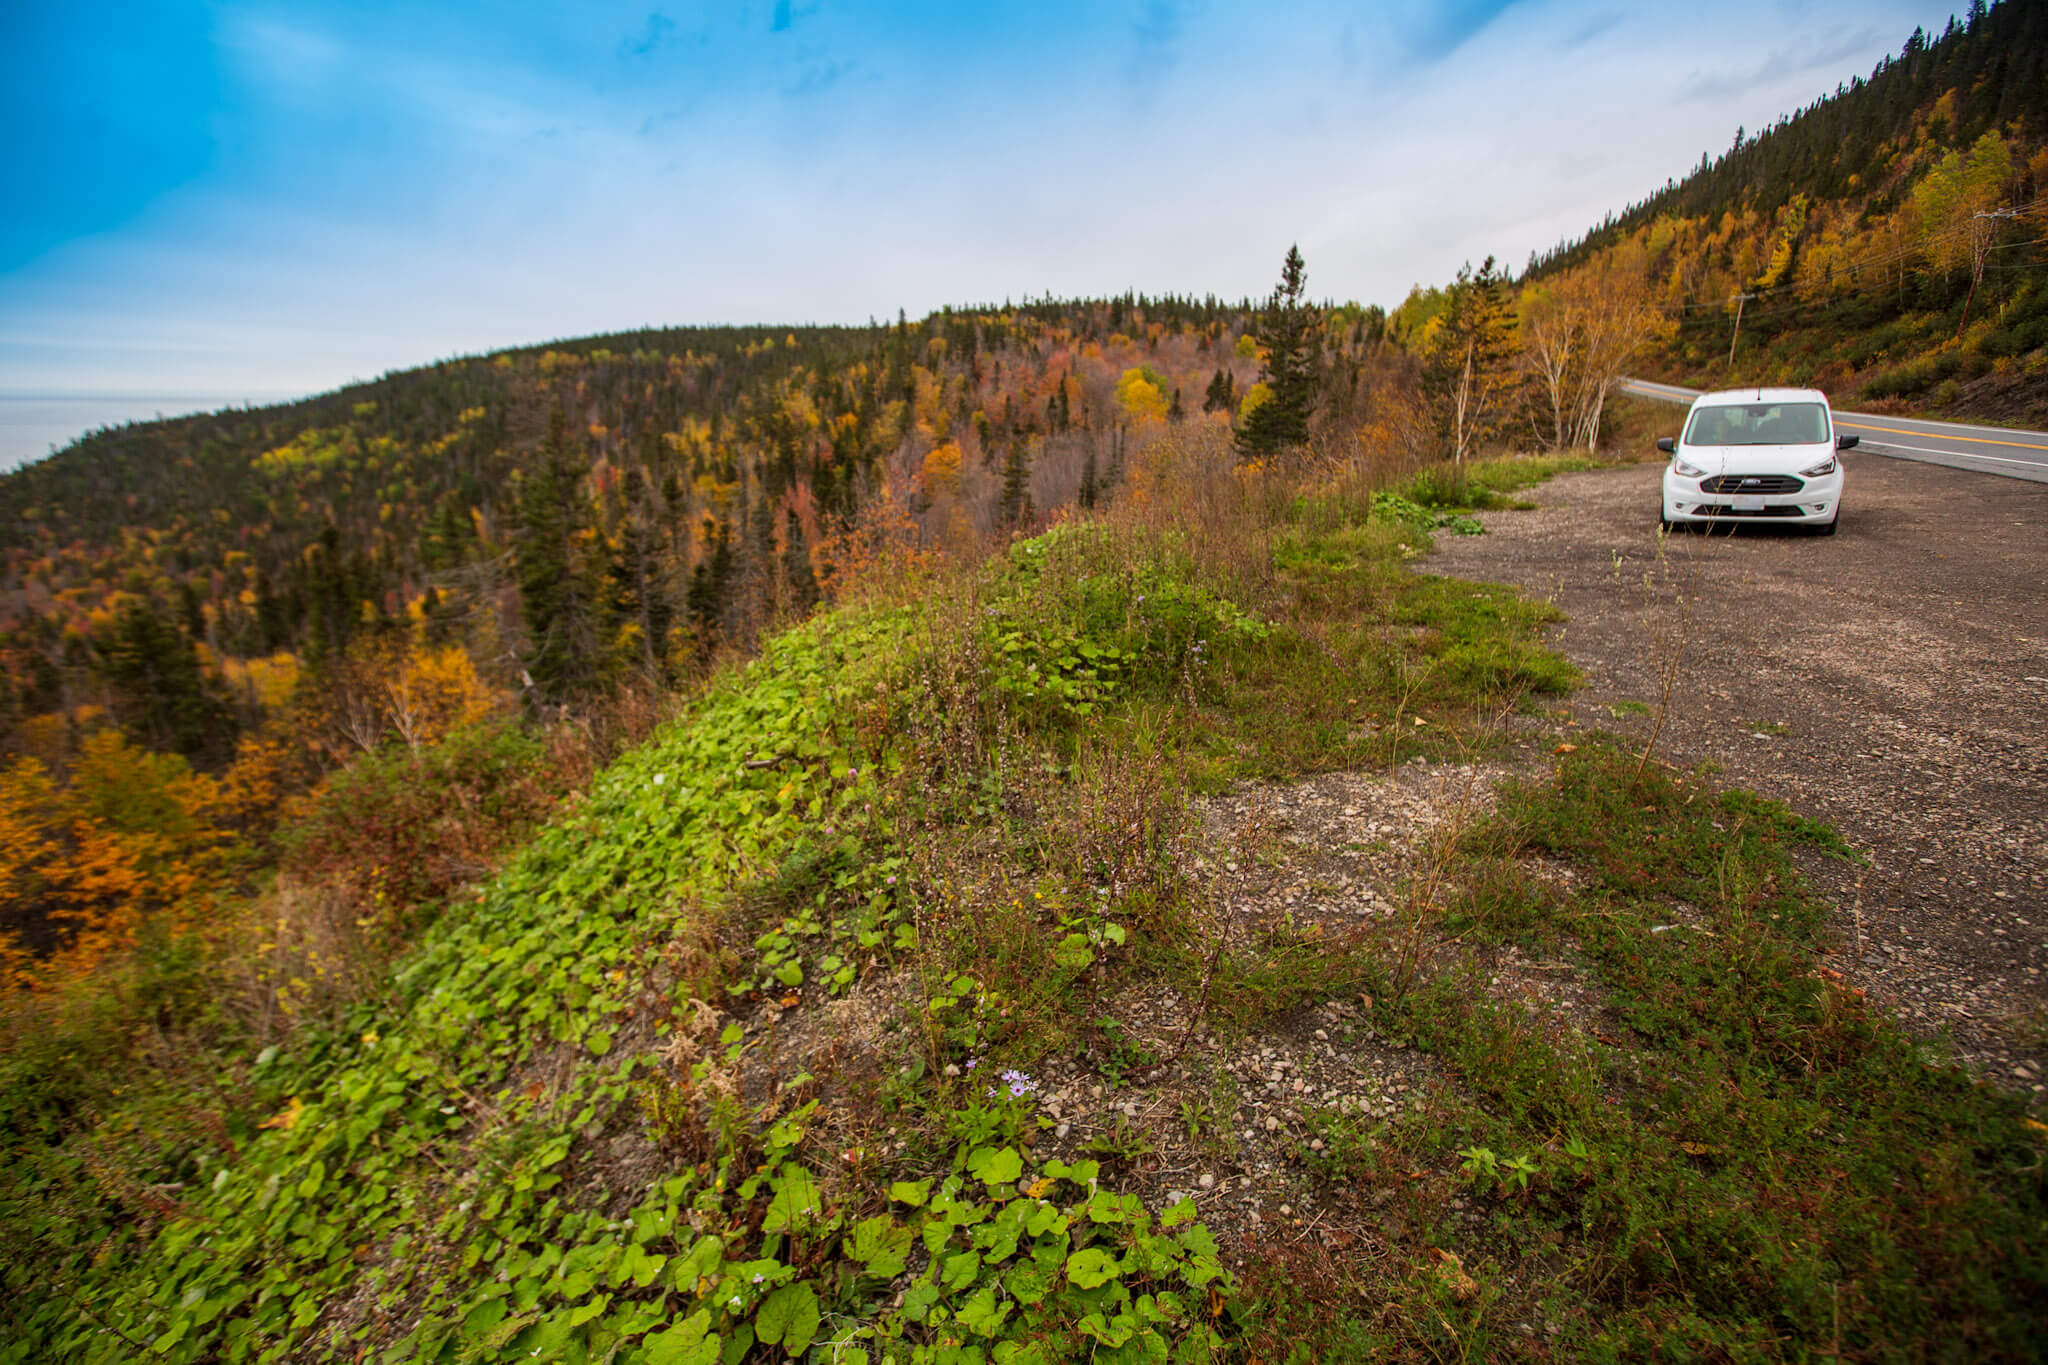 Enjoying the hilly landscape of the Gaspé peninsula in our Ford Transit Connect conversion